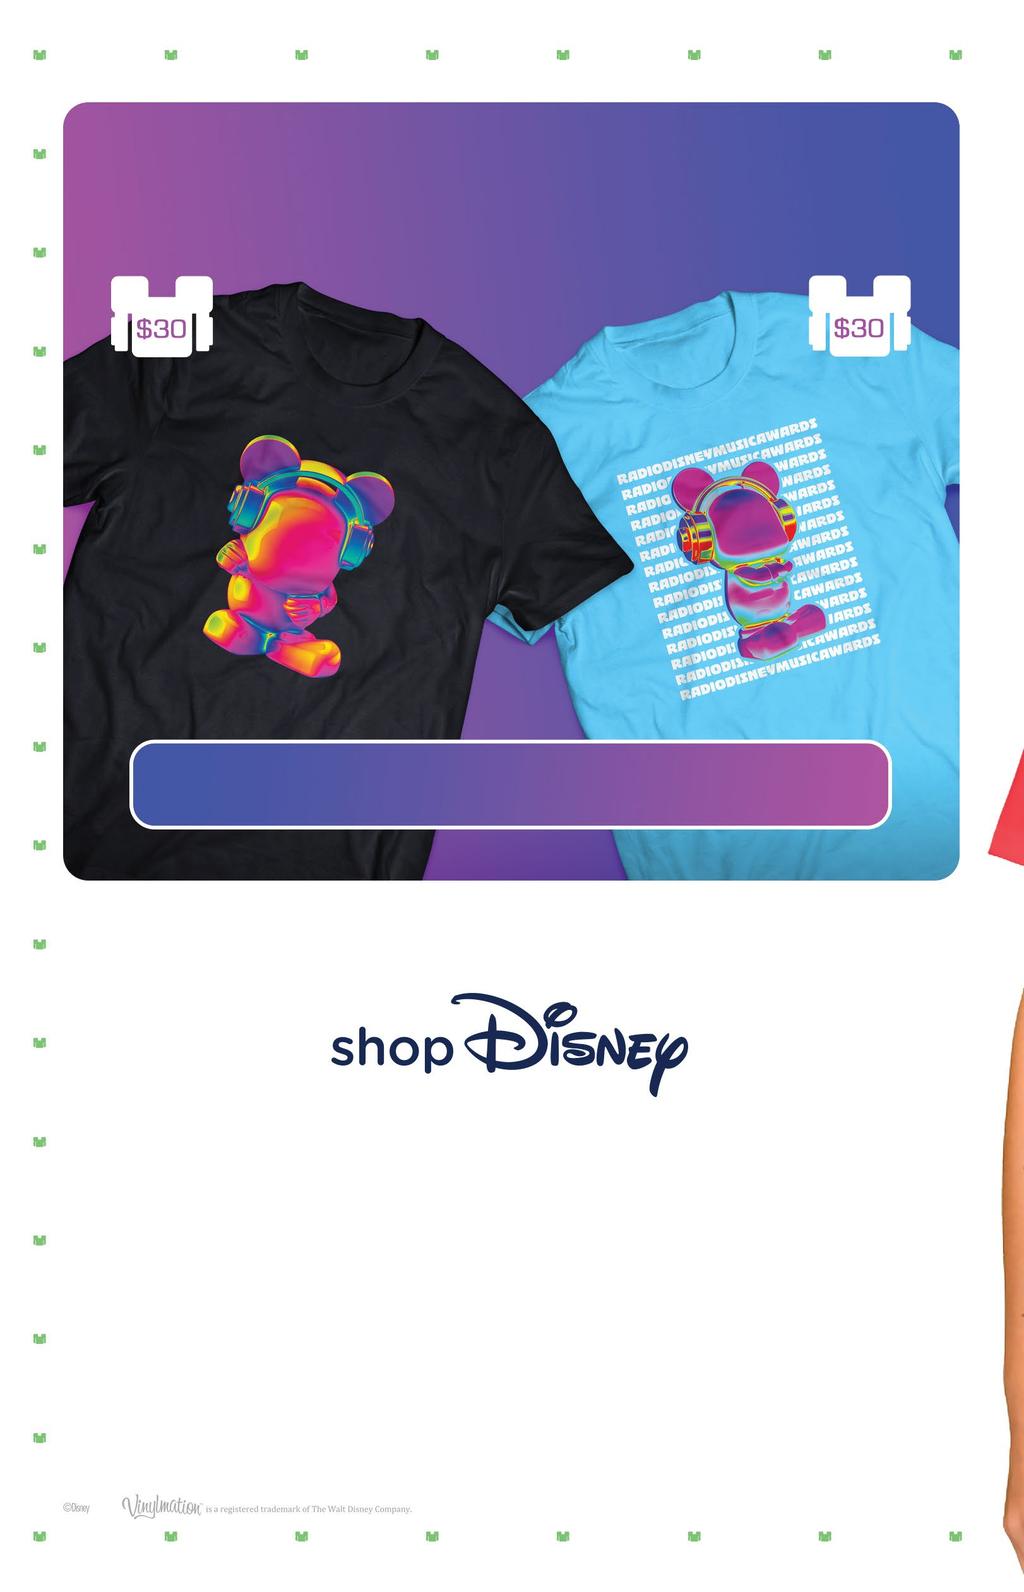 Get Yours Now! Purchase your own exclusive 2018 RDMA T-shirts now!